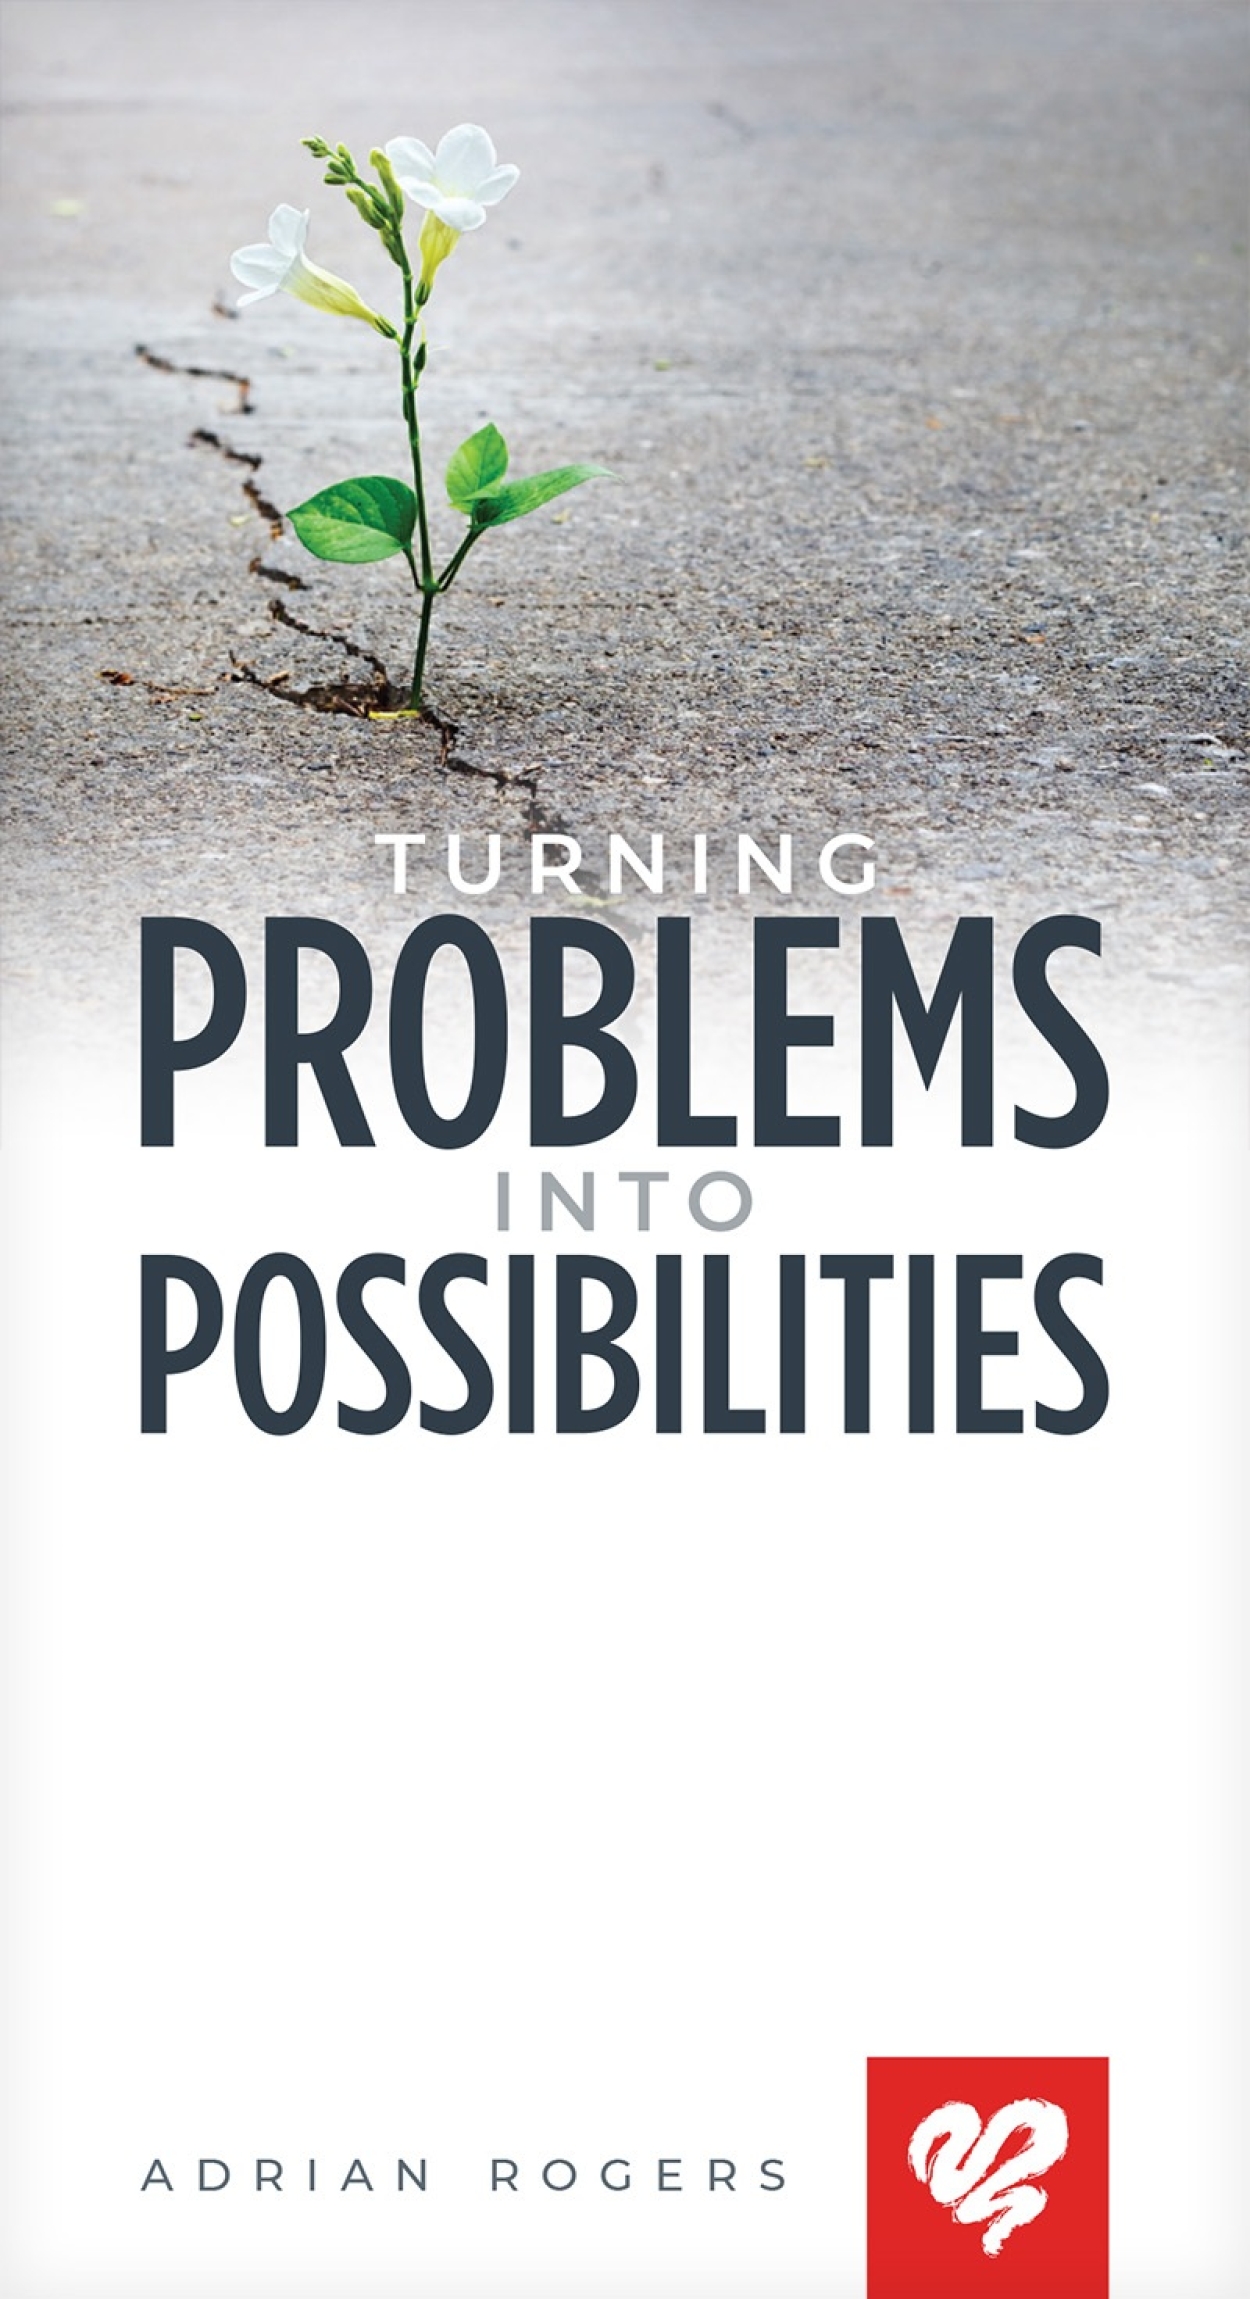 Turning Problems Into Possibilities Booklet K131